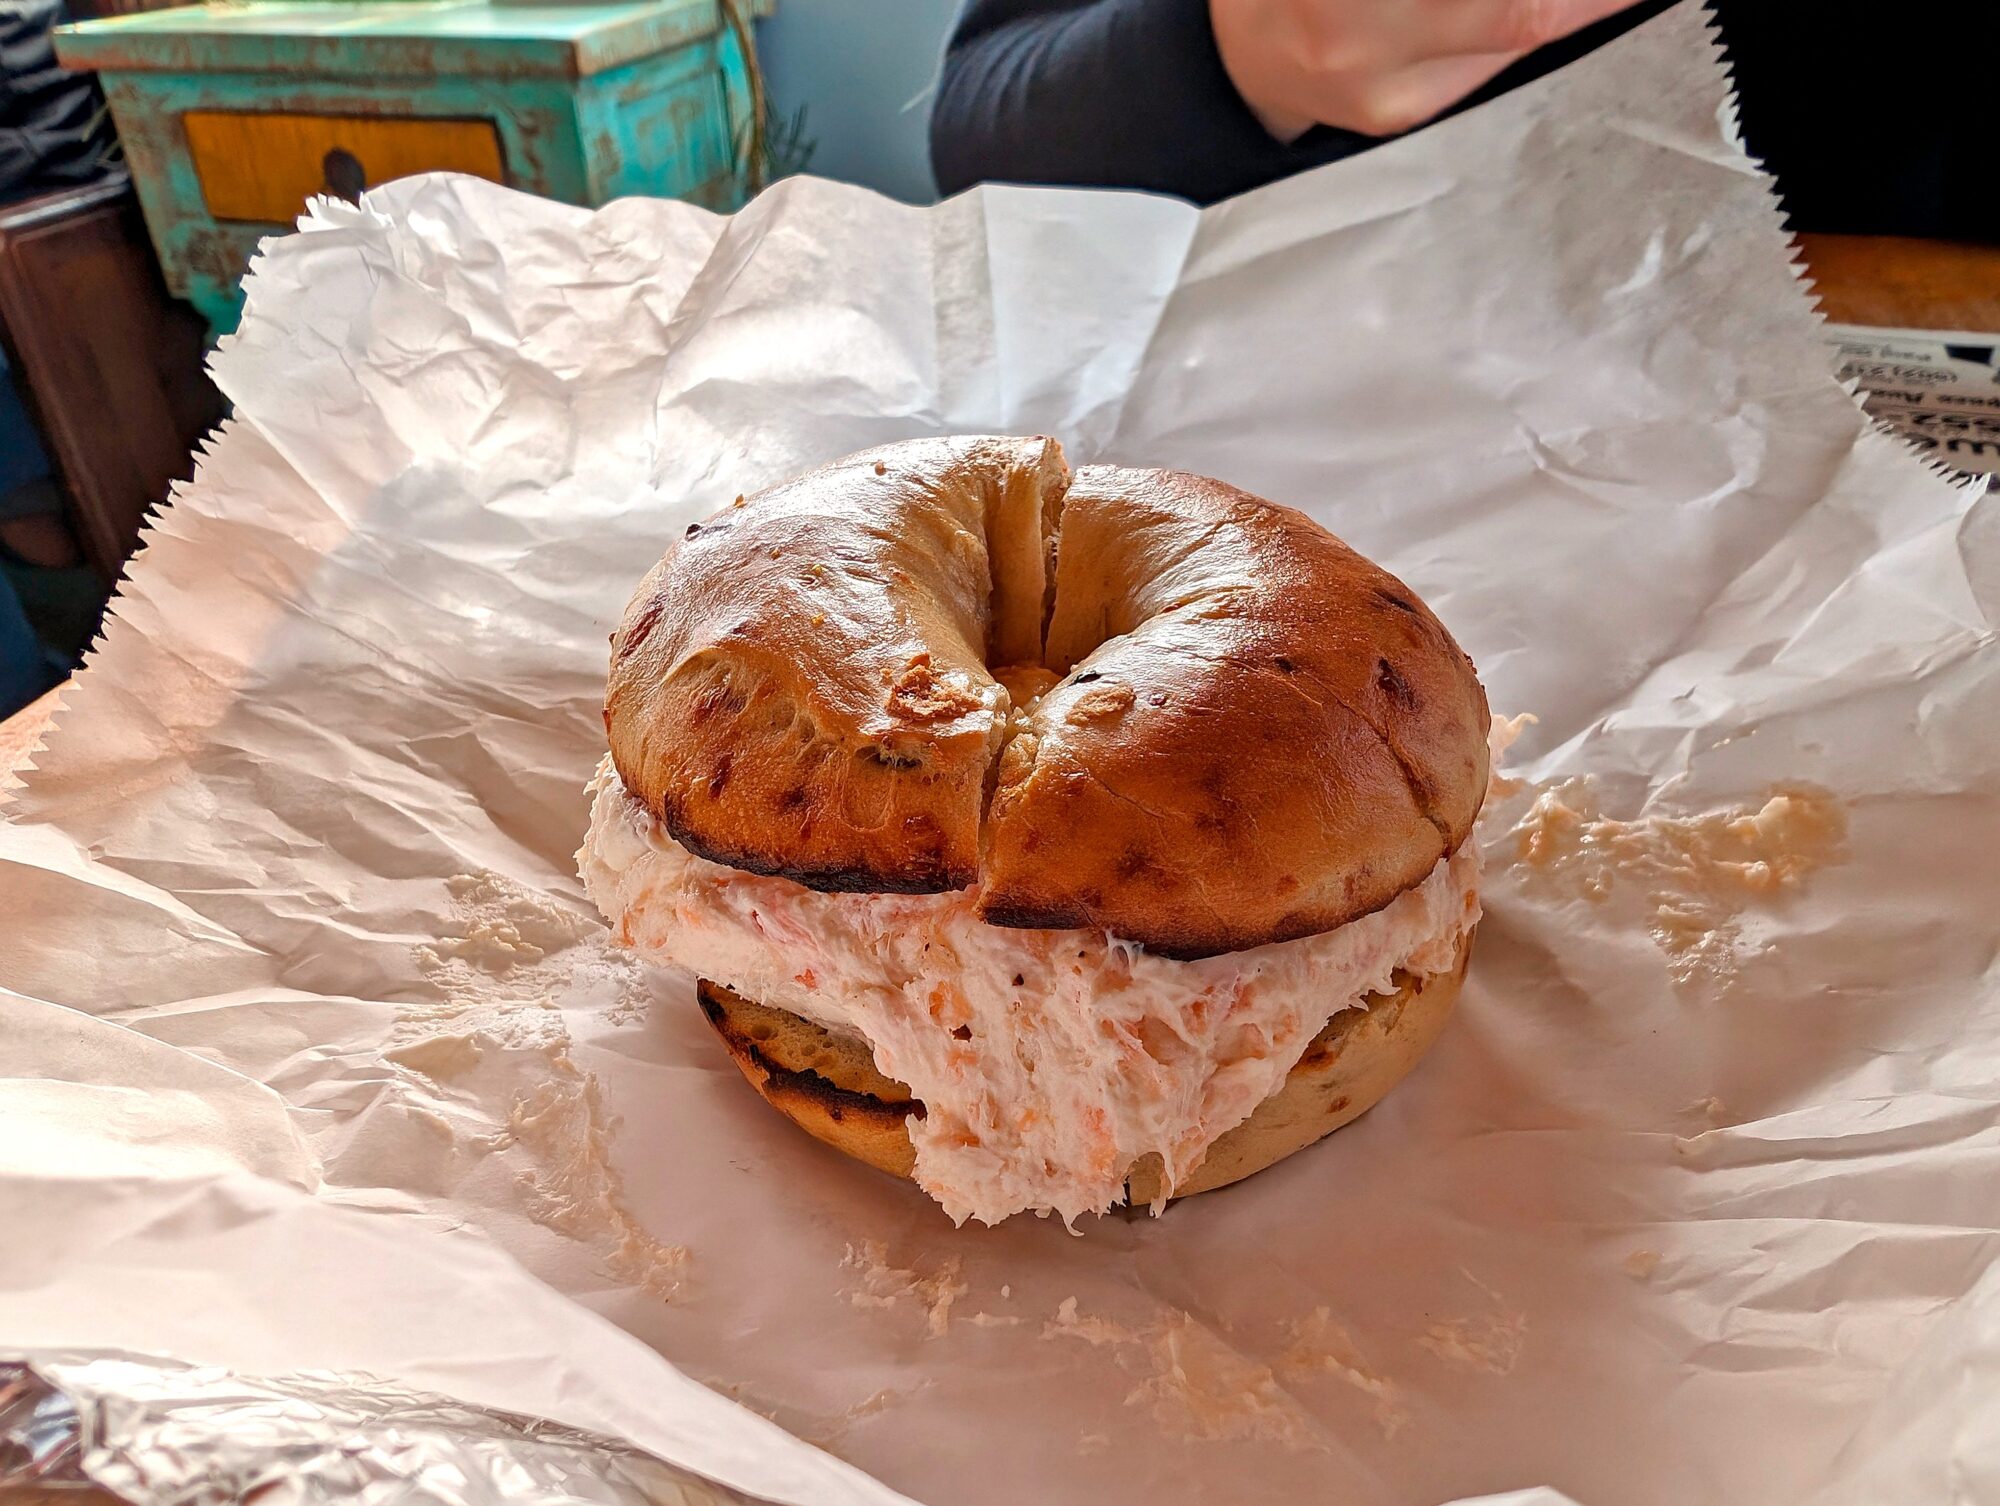 A bagel with cream cheese at Payne Street Bake House